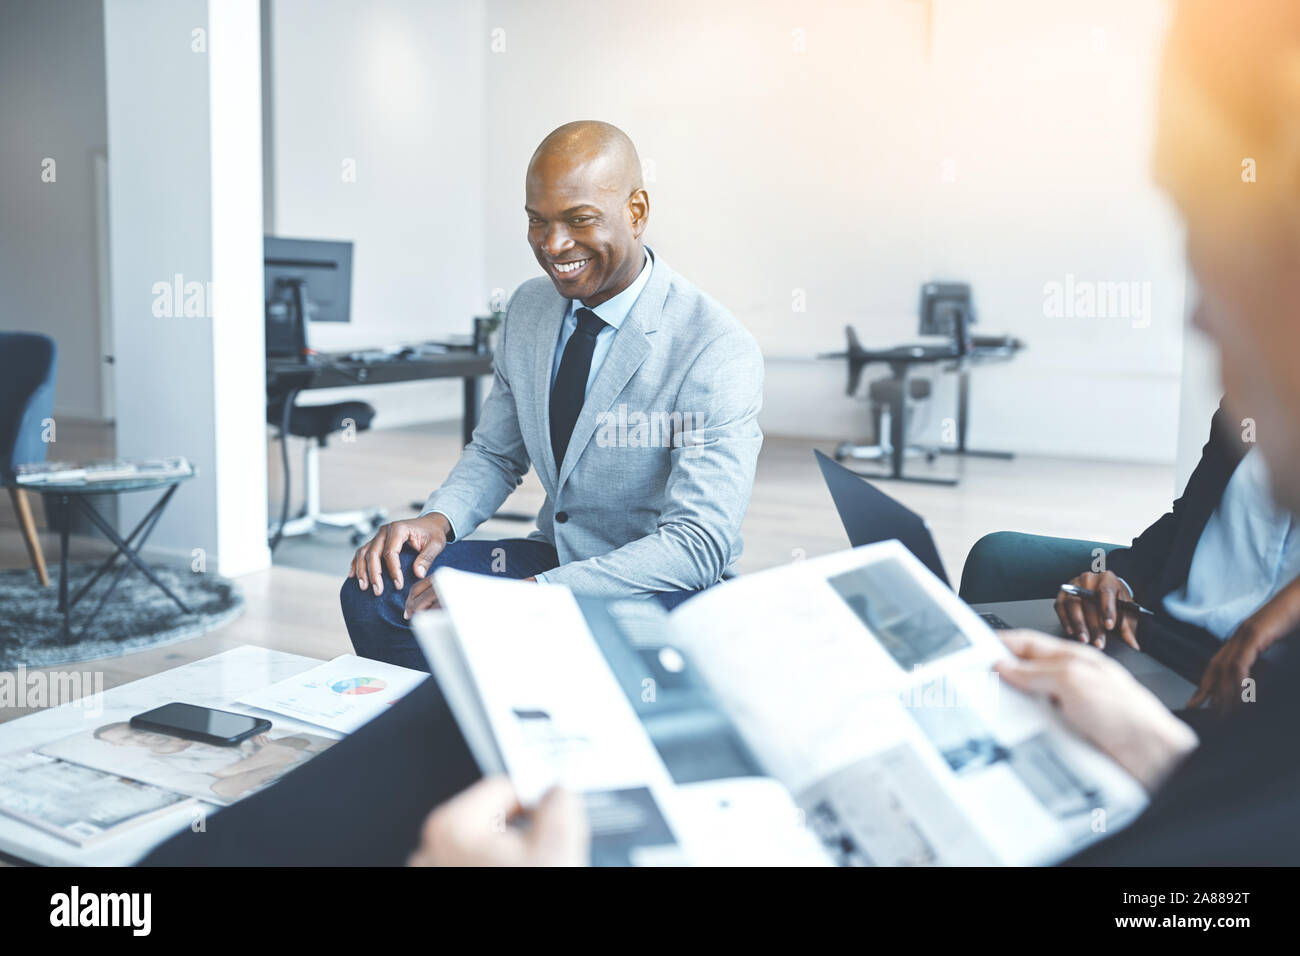 Young African American businessman laughing during a casual meeting with a group of colleagues in an office Stock Photo